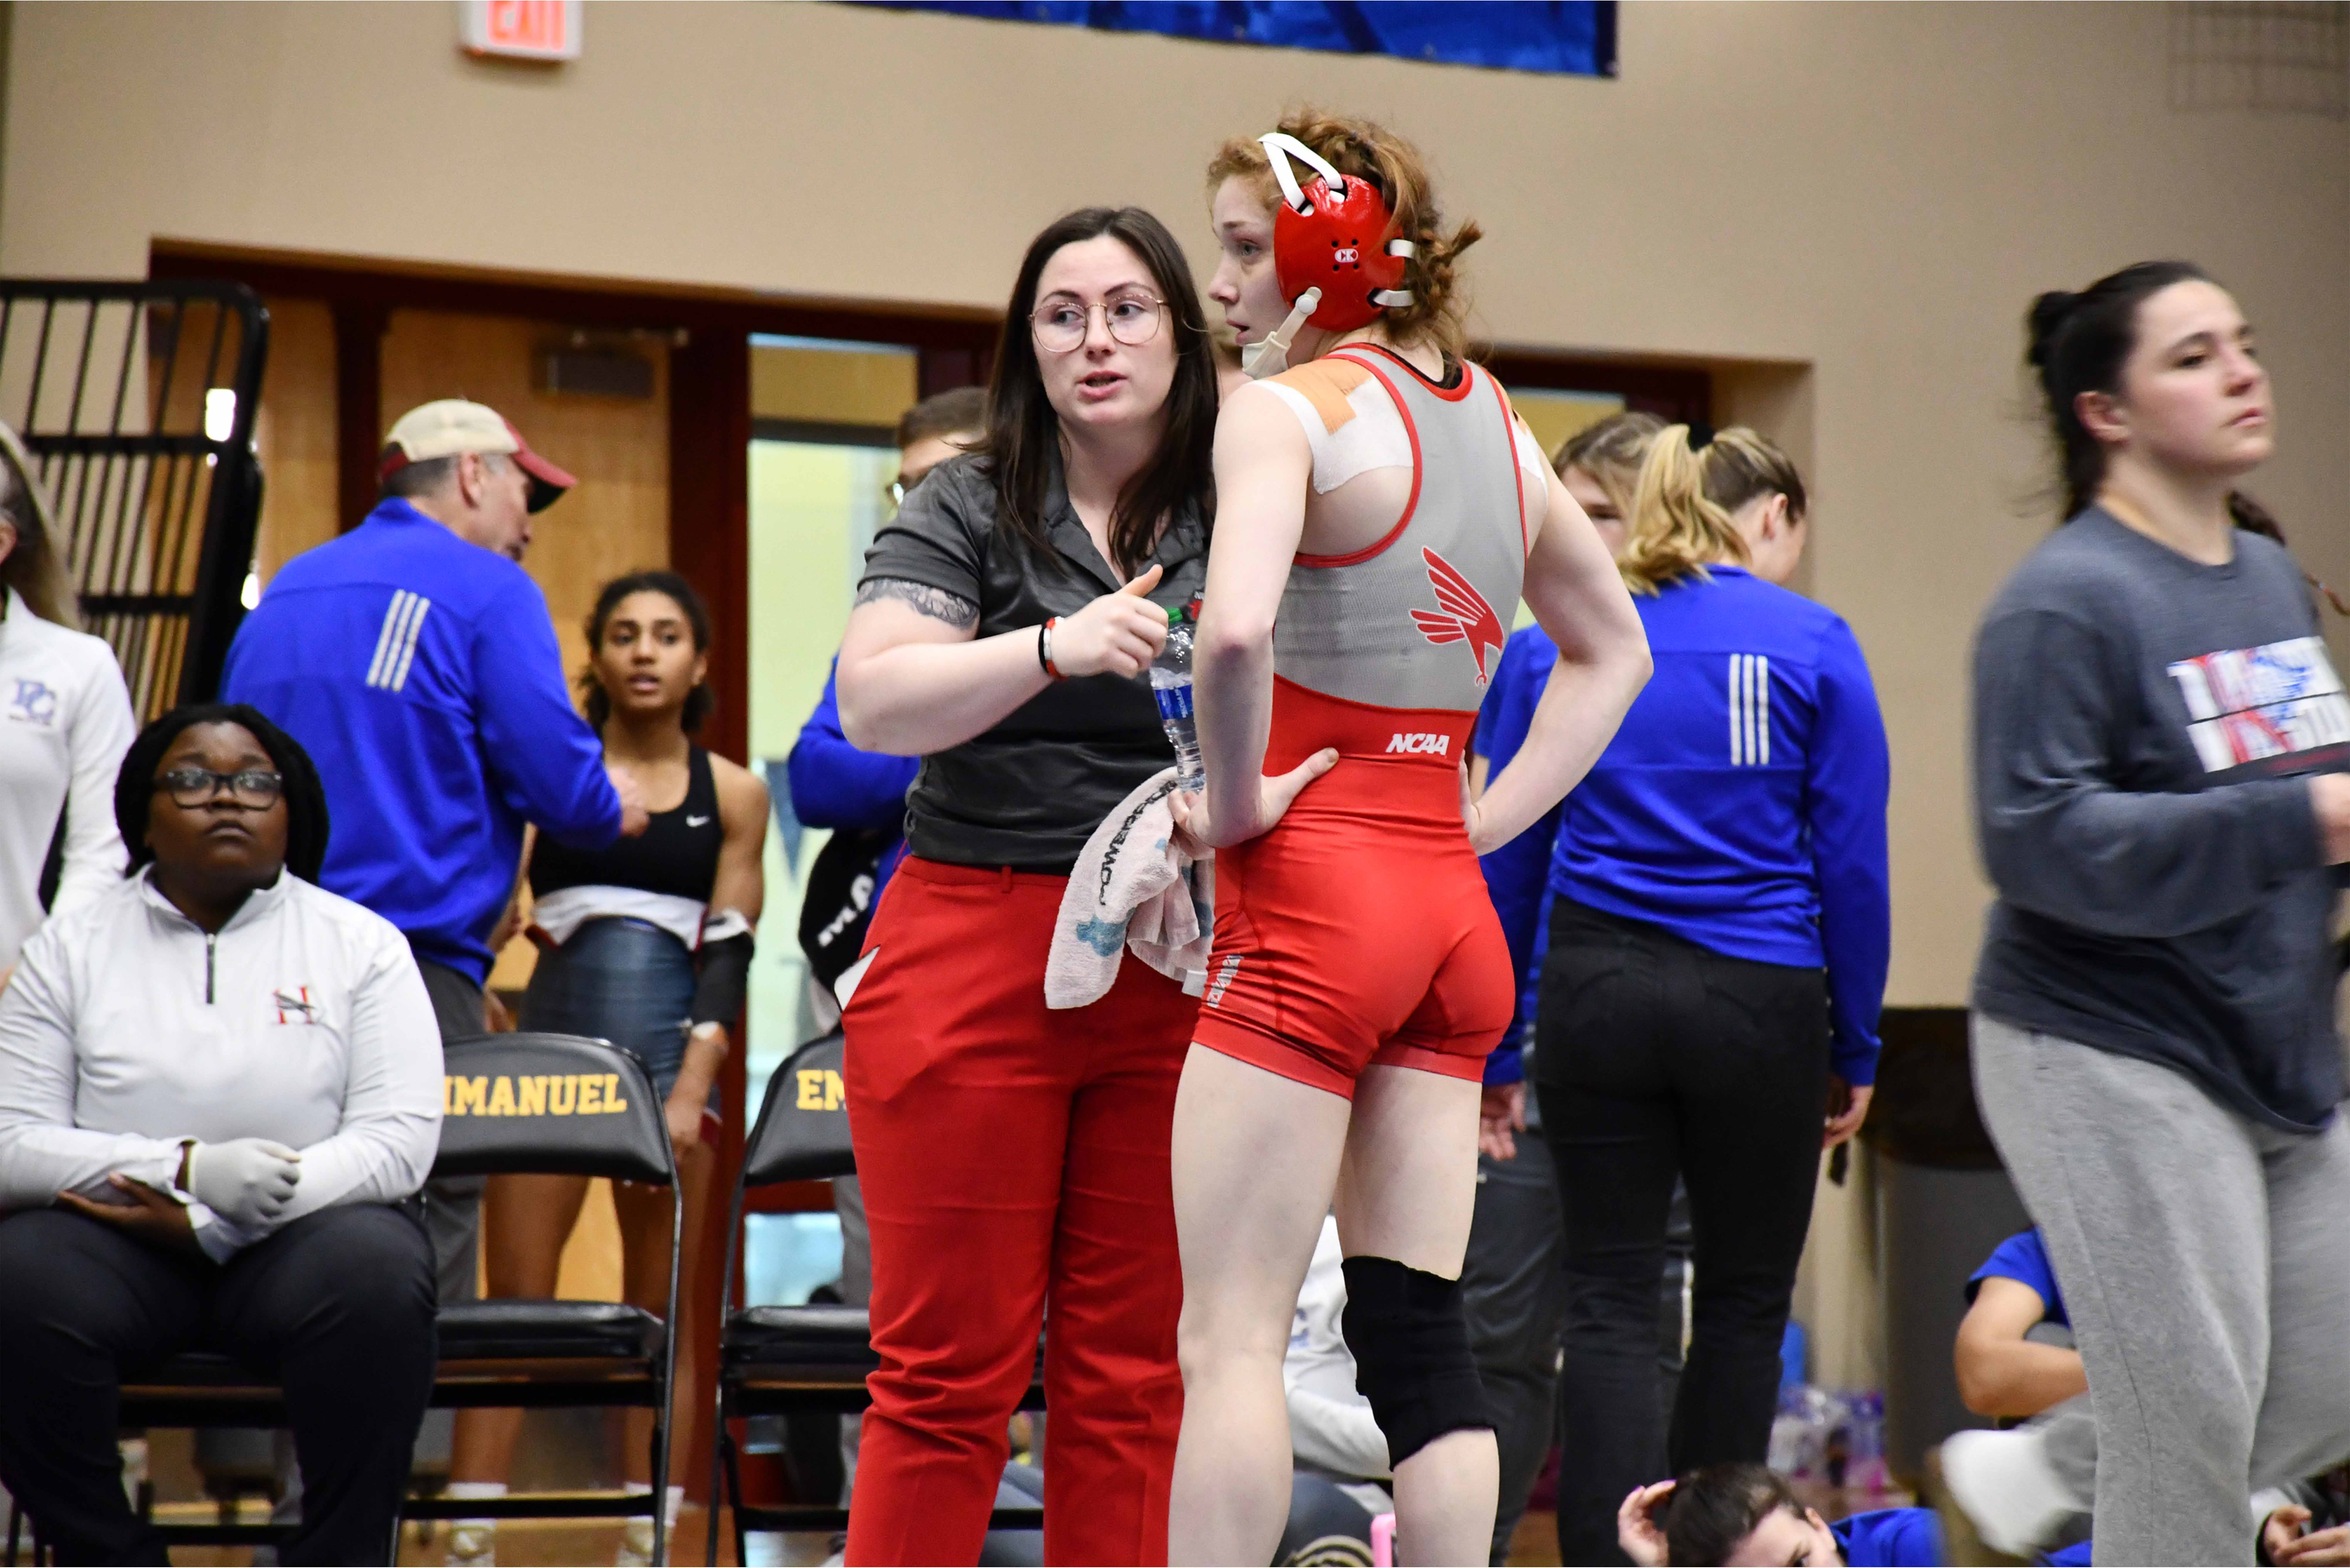 Lillian Humphries Promoted To Head Coach Of Women's Wrestling